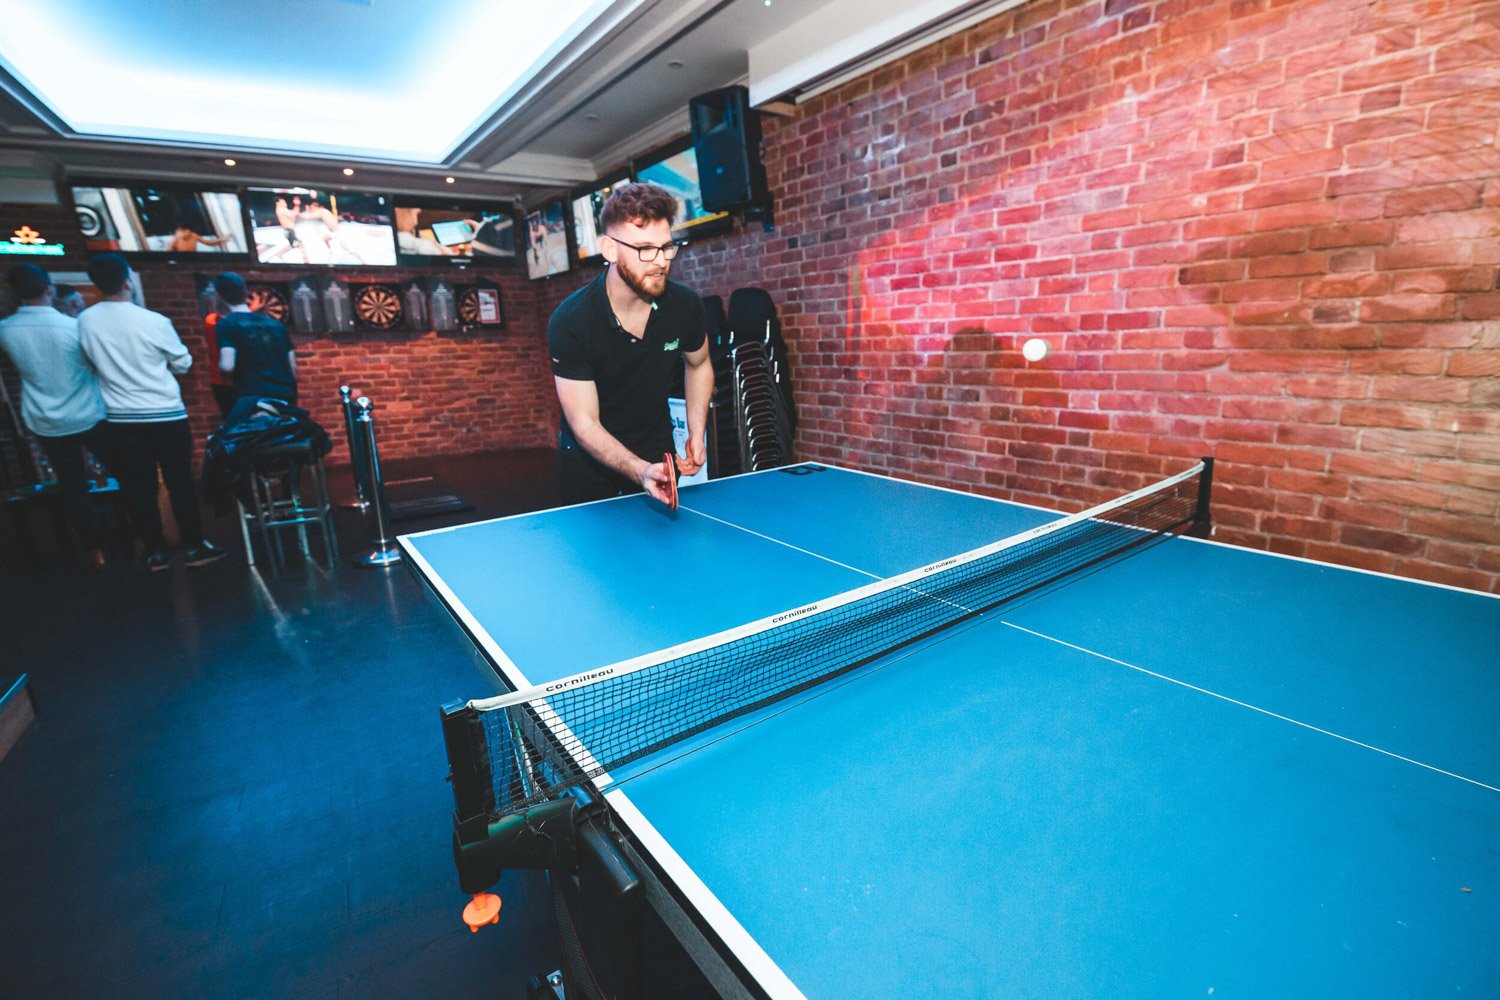 Sharkeys_Sports_Bar_Bournemouth_Live_Sports_Poole_Snooker_Table_Tennis_VIP_Rooms_Consoles-4.jpg